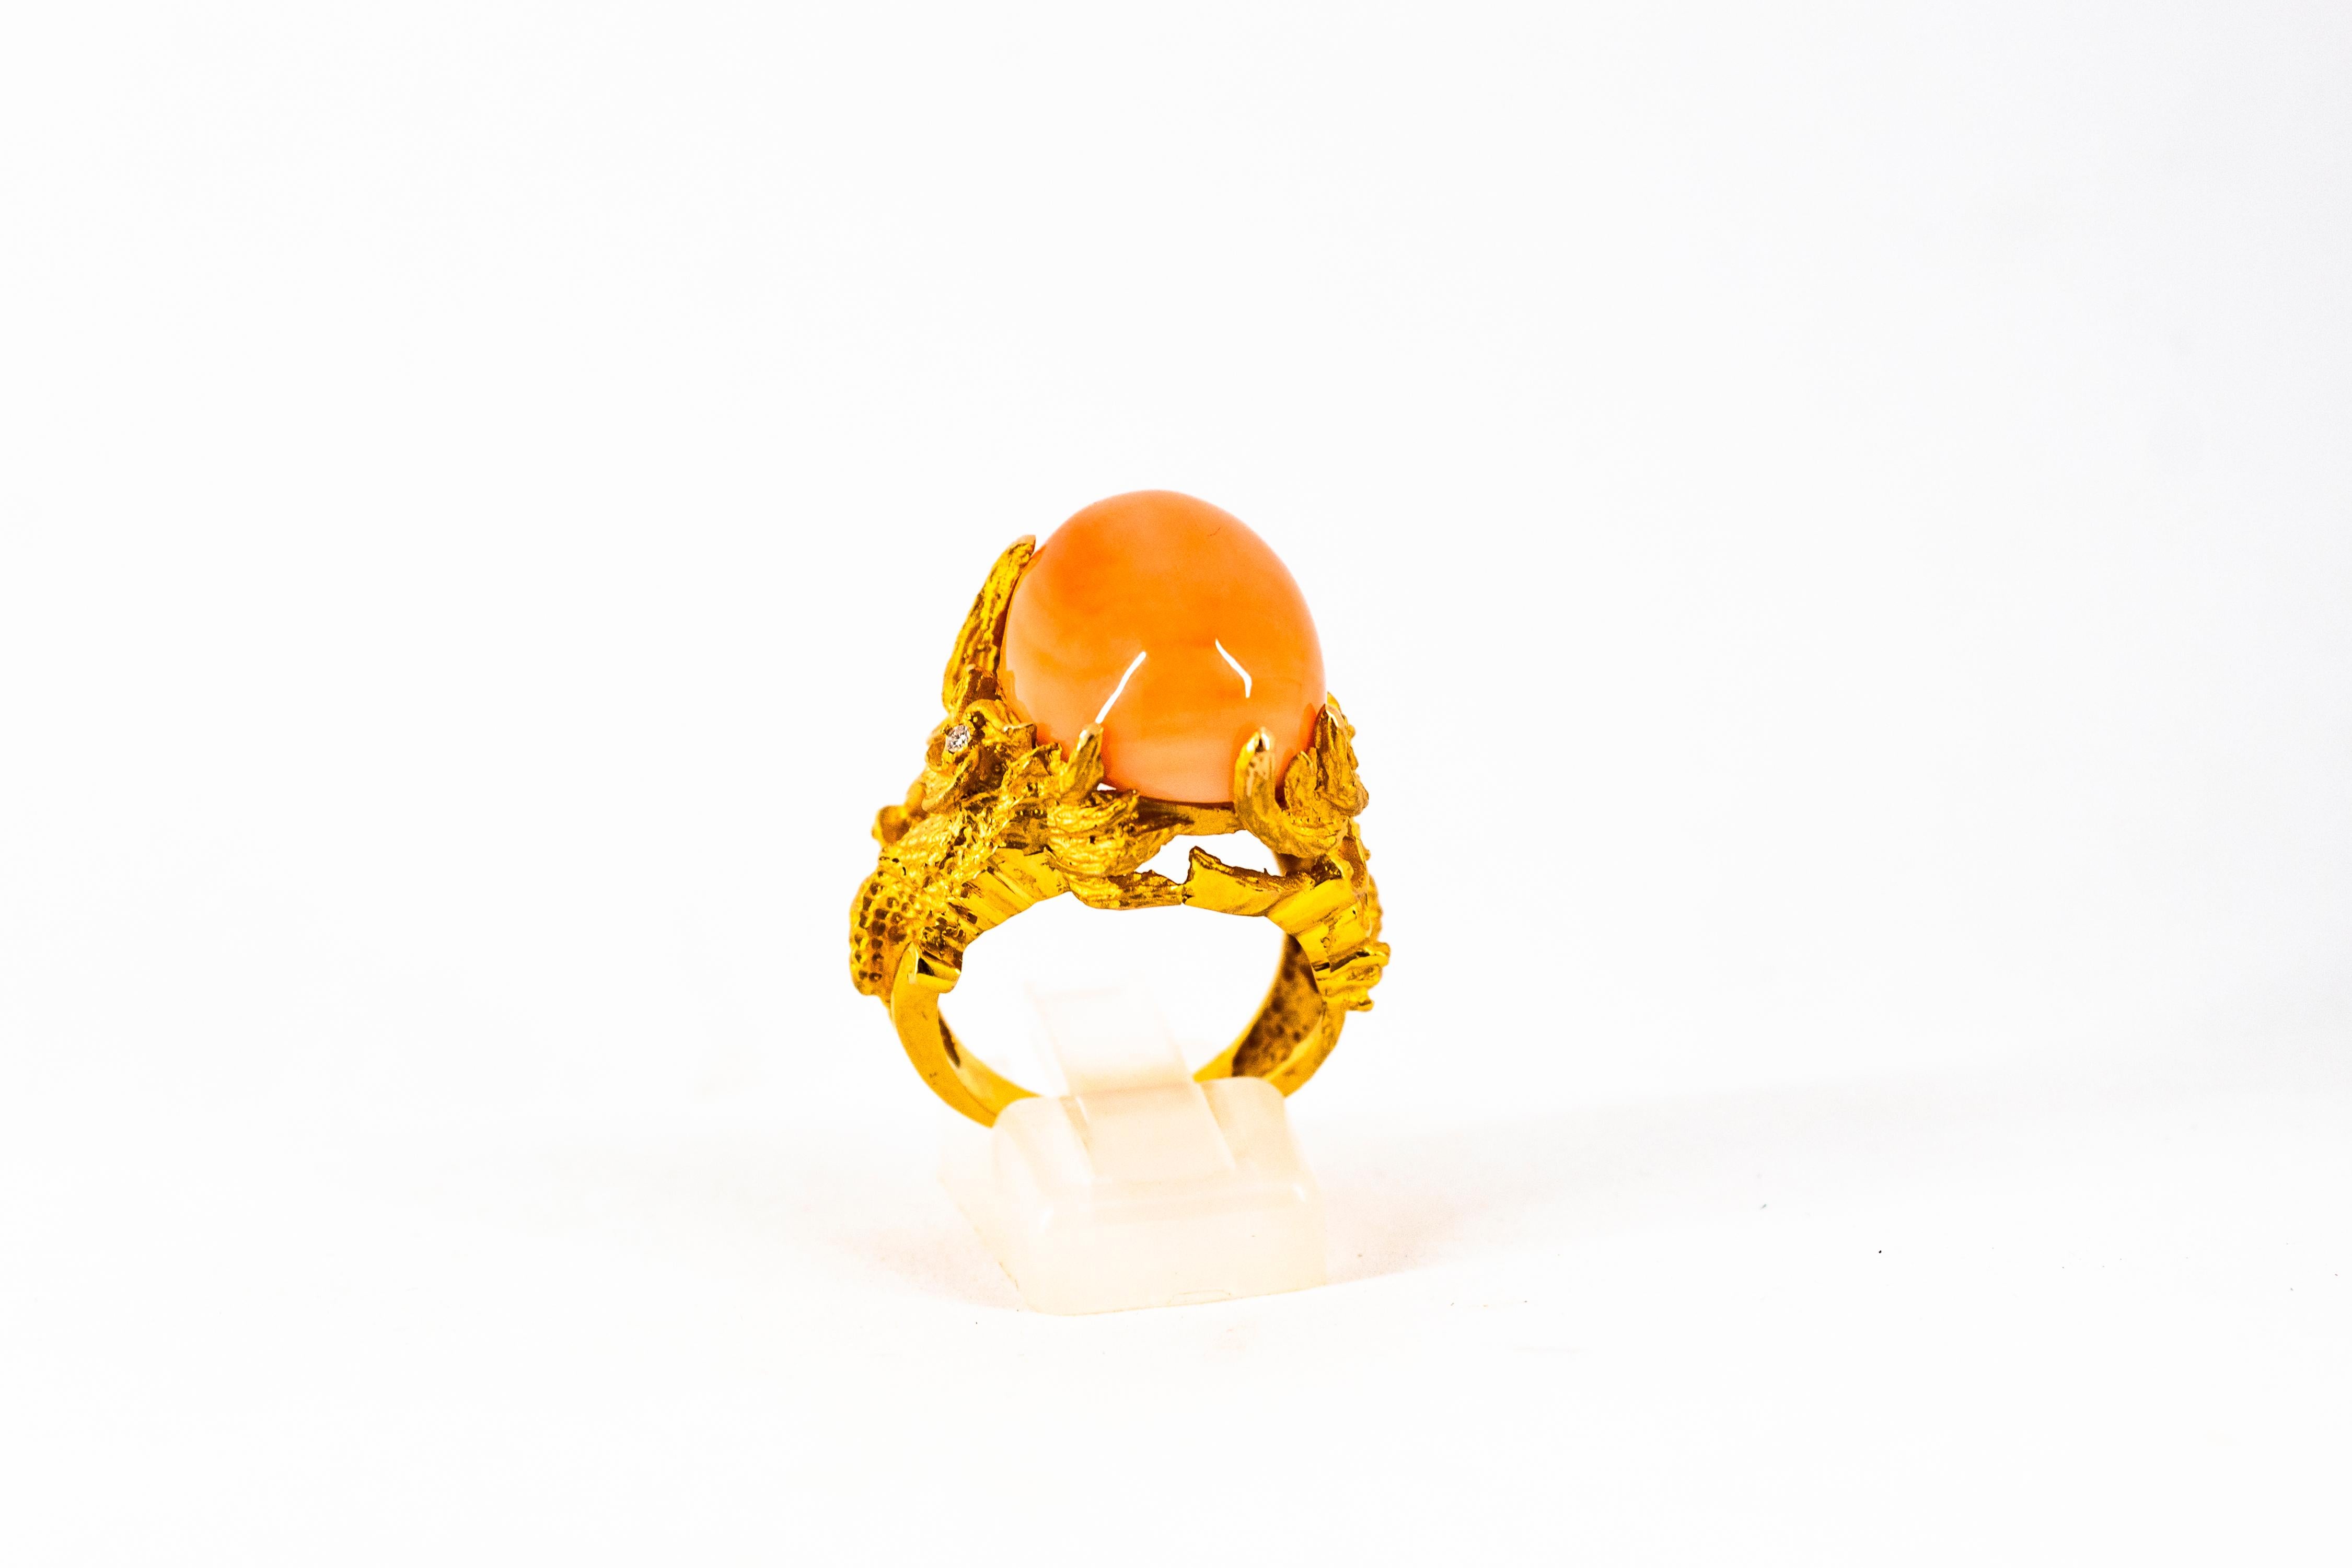 21.52 Carat Cabochon Pink Coral White Diamond Yellow Gold Dragons Cocktail Ring For Sale 3